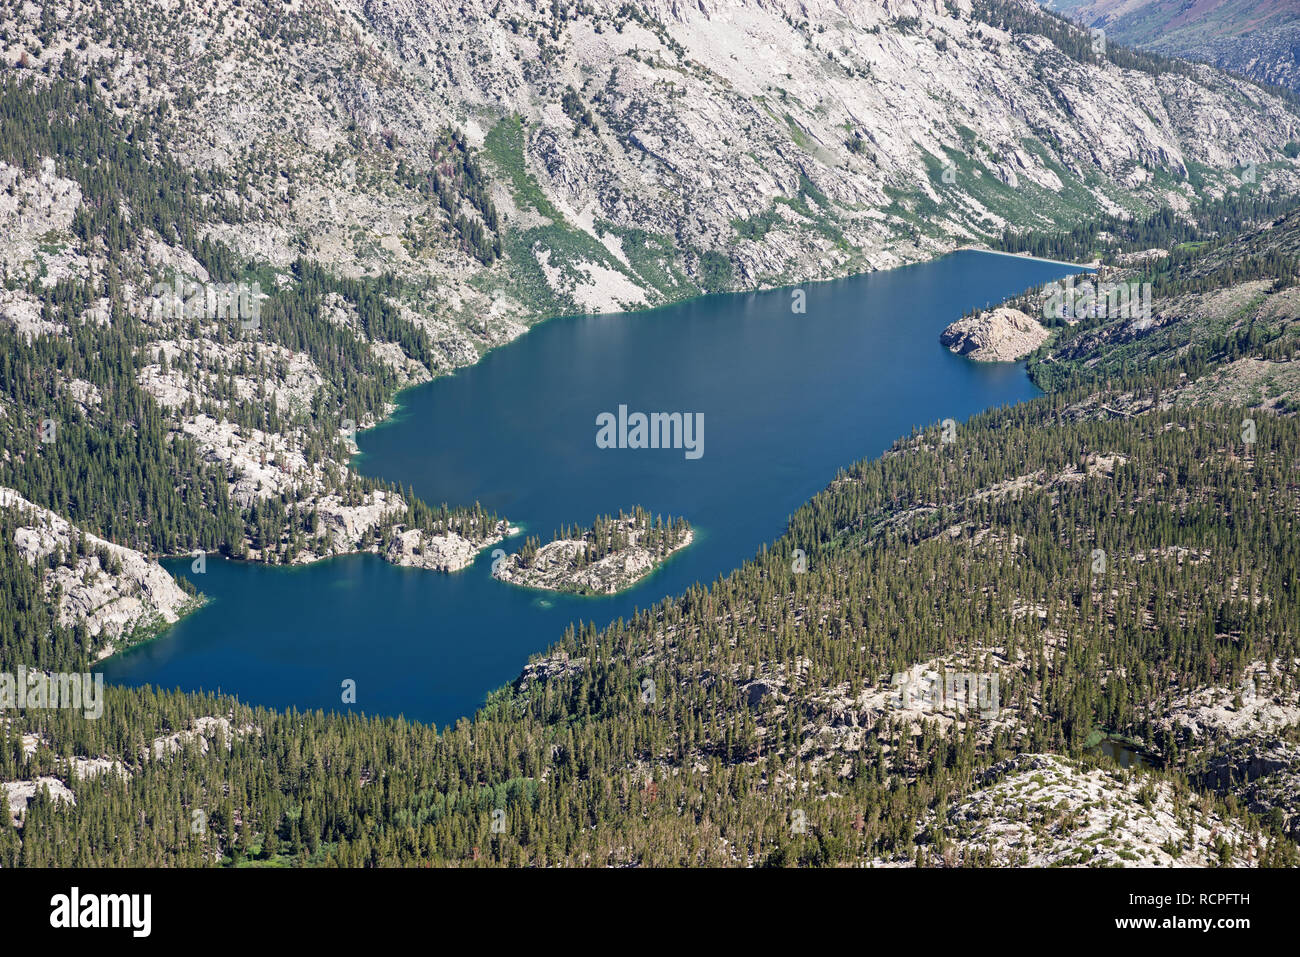 aerial view showing a full South Lake water Reservoir in California Stock Photo